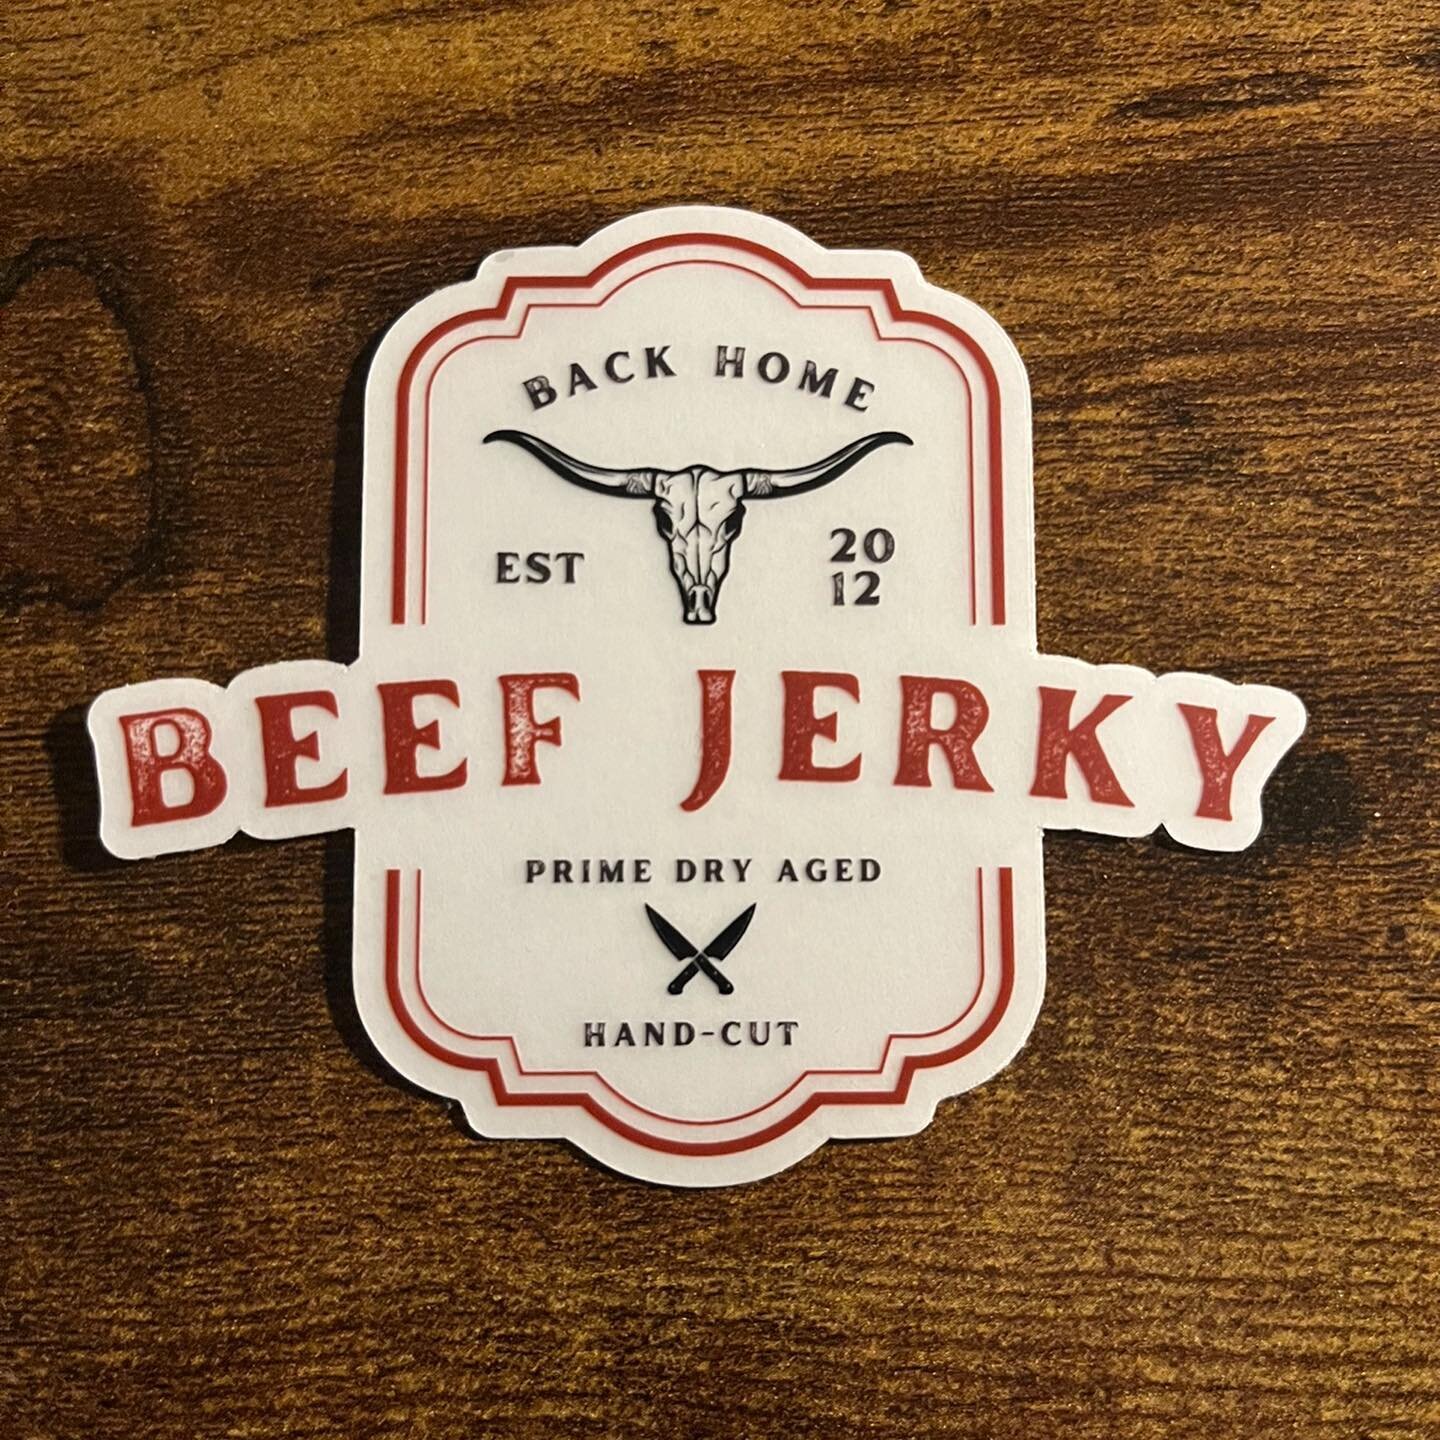 GIVEAWAY 👇👇

Our website is officially up and running!! Check it out with the link in our bio to learn more about us and where we will be this summer🤭

In celebration of the launch of our website we are giving away a back home beef jerky T-Shirt a